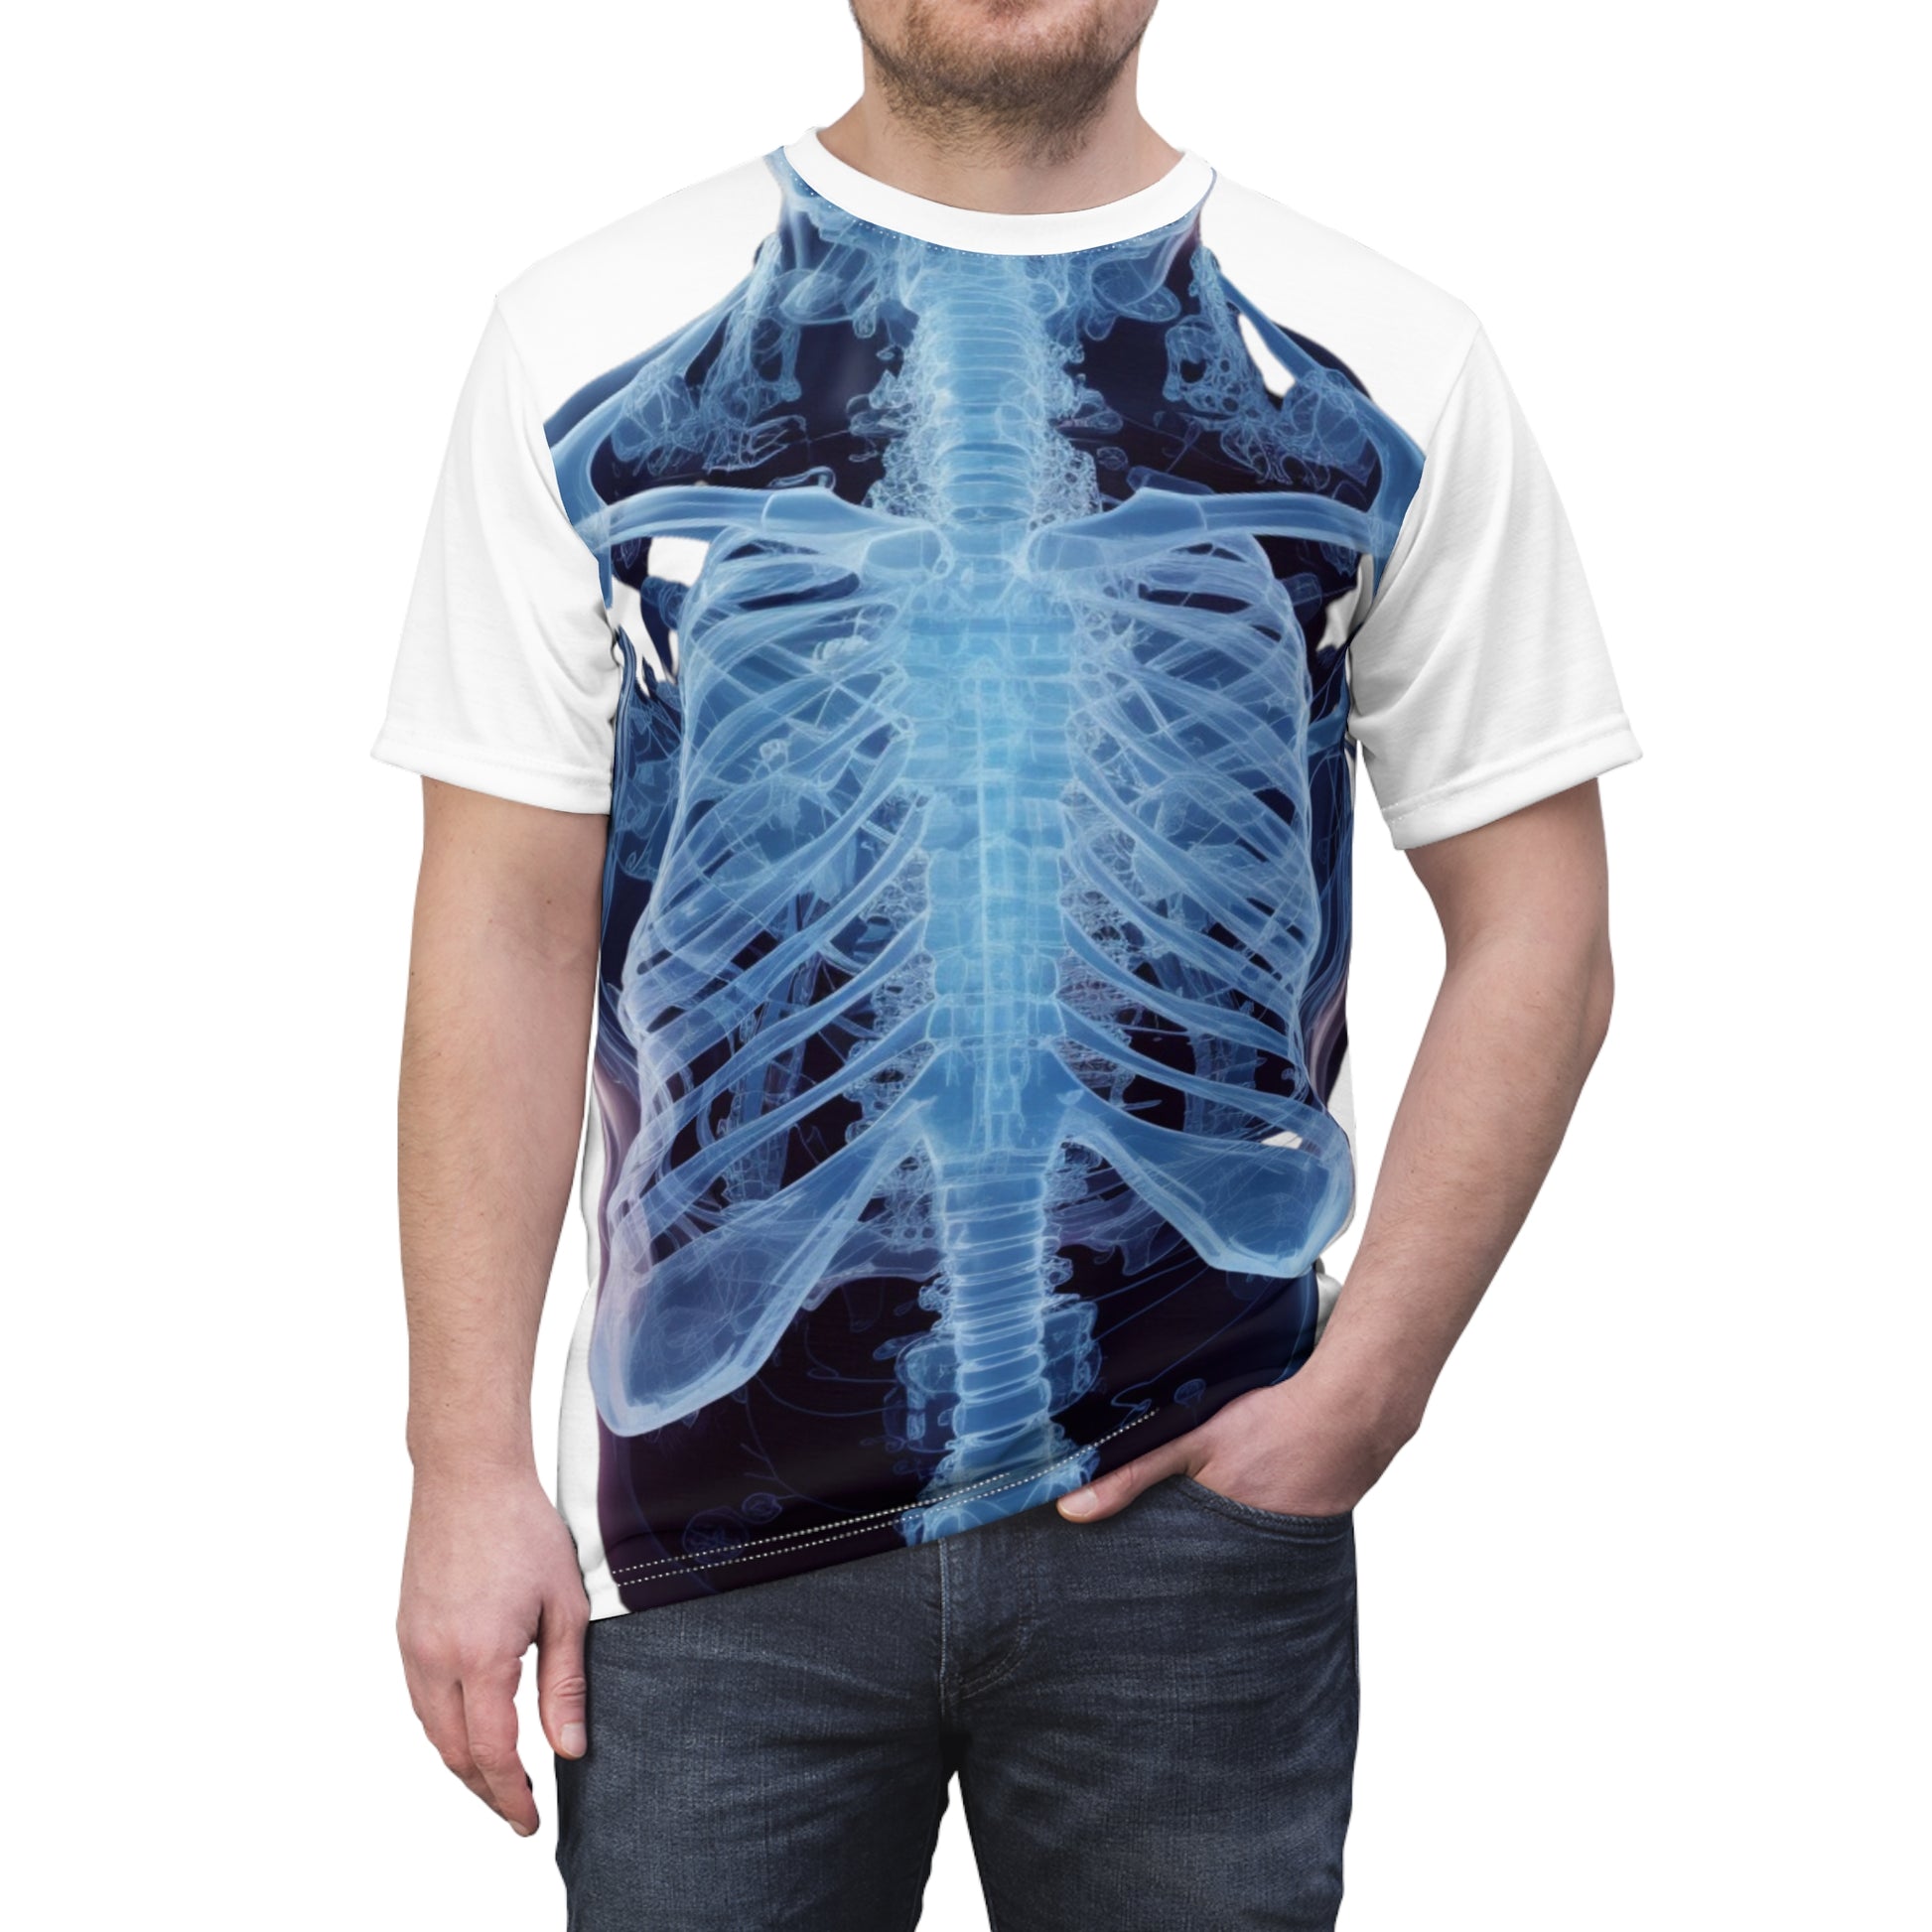 Wear Art with Our Torsion Human Body X-Ray All Over Print T-Shirt - Unique and Strikingly Detailed Design for Medical and Art Enthusiasts! All Over Prints   